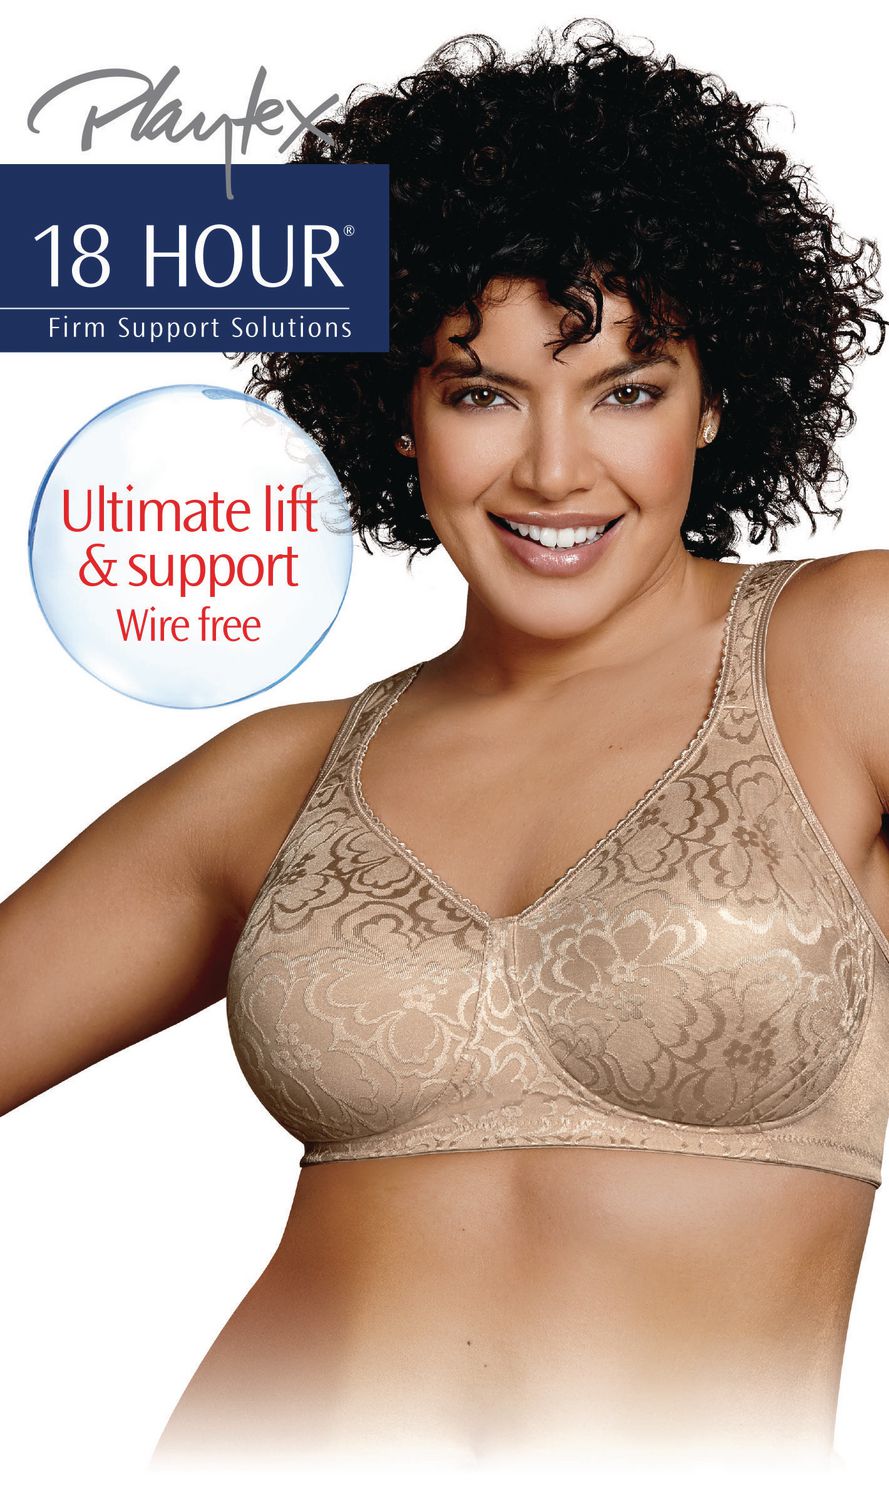 PLAYTEX 18 HOUR Ultimate Lift & Support Wirefree Bra, Nude, Size 12 - 24